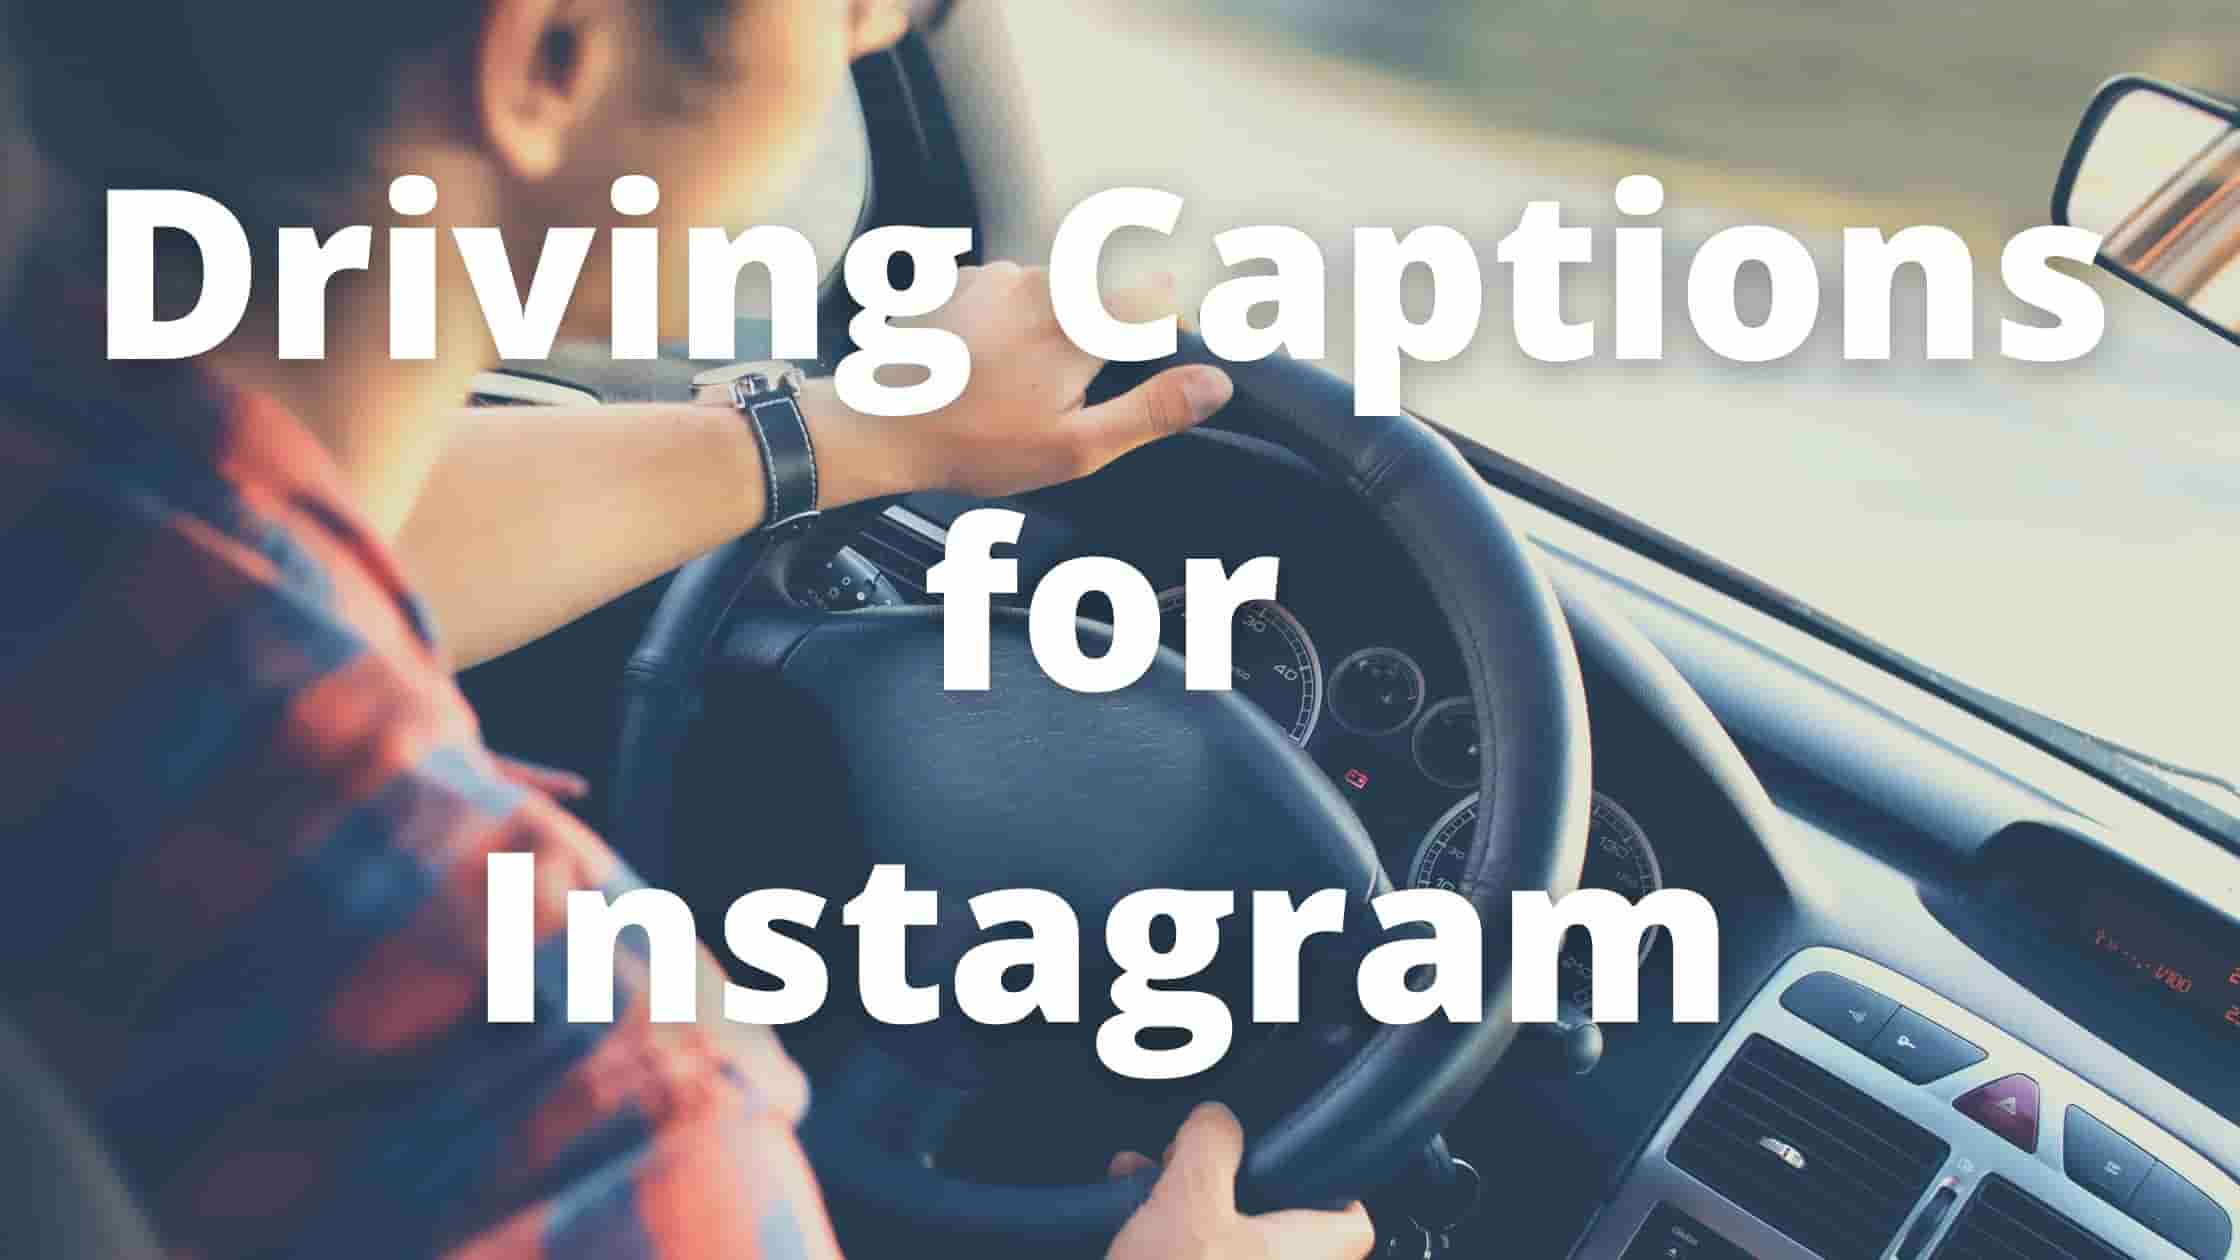 Driving Captions for Instagram